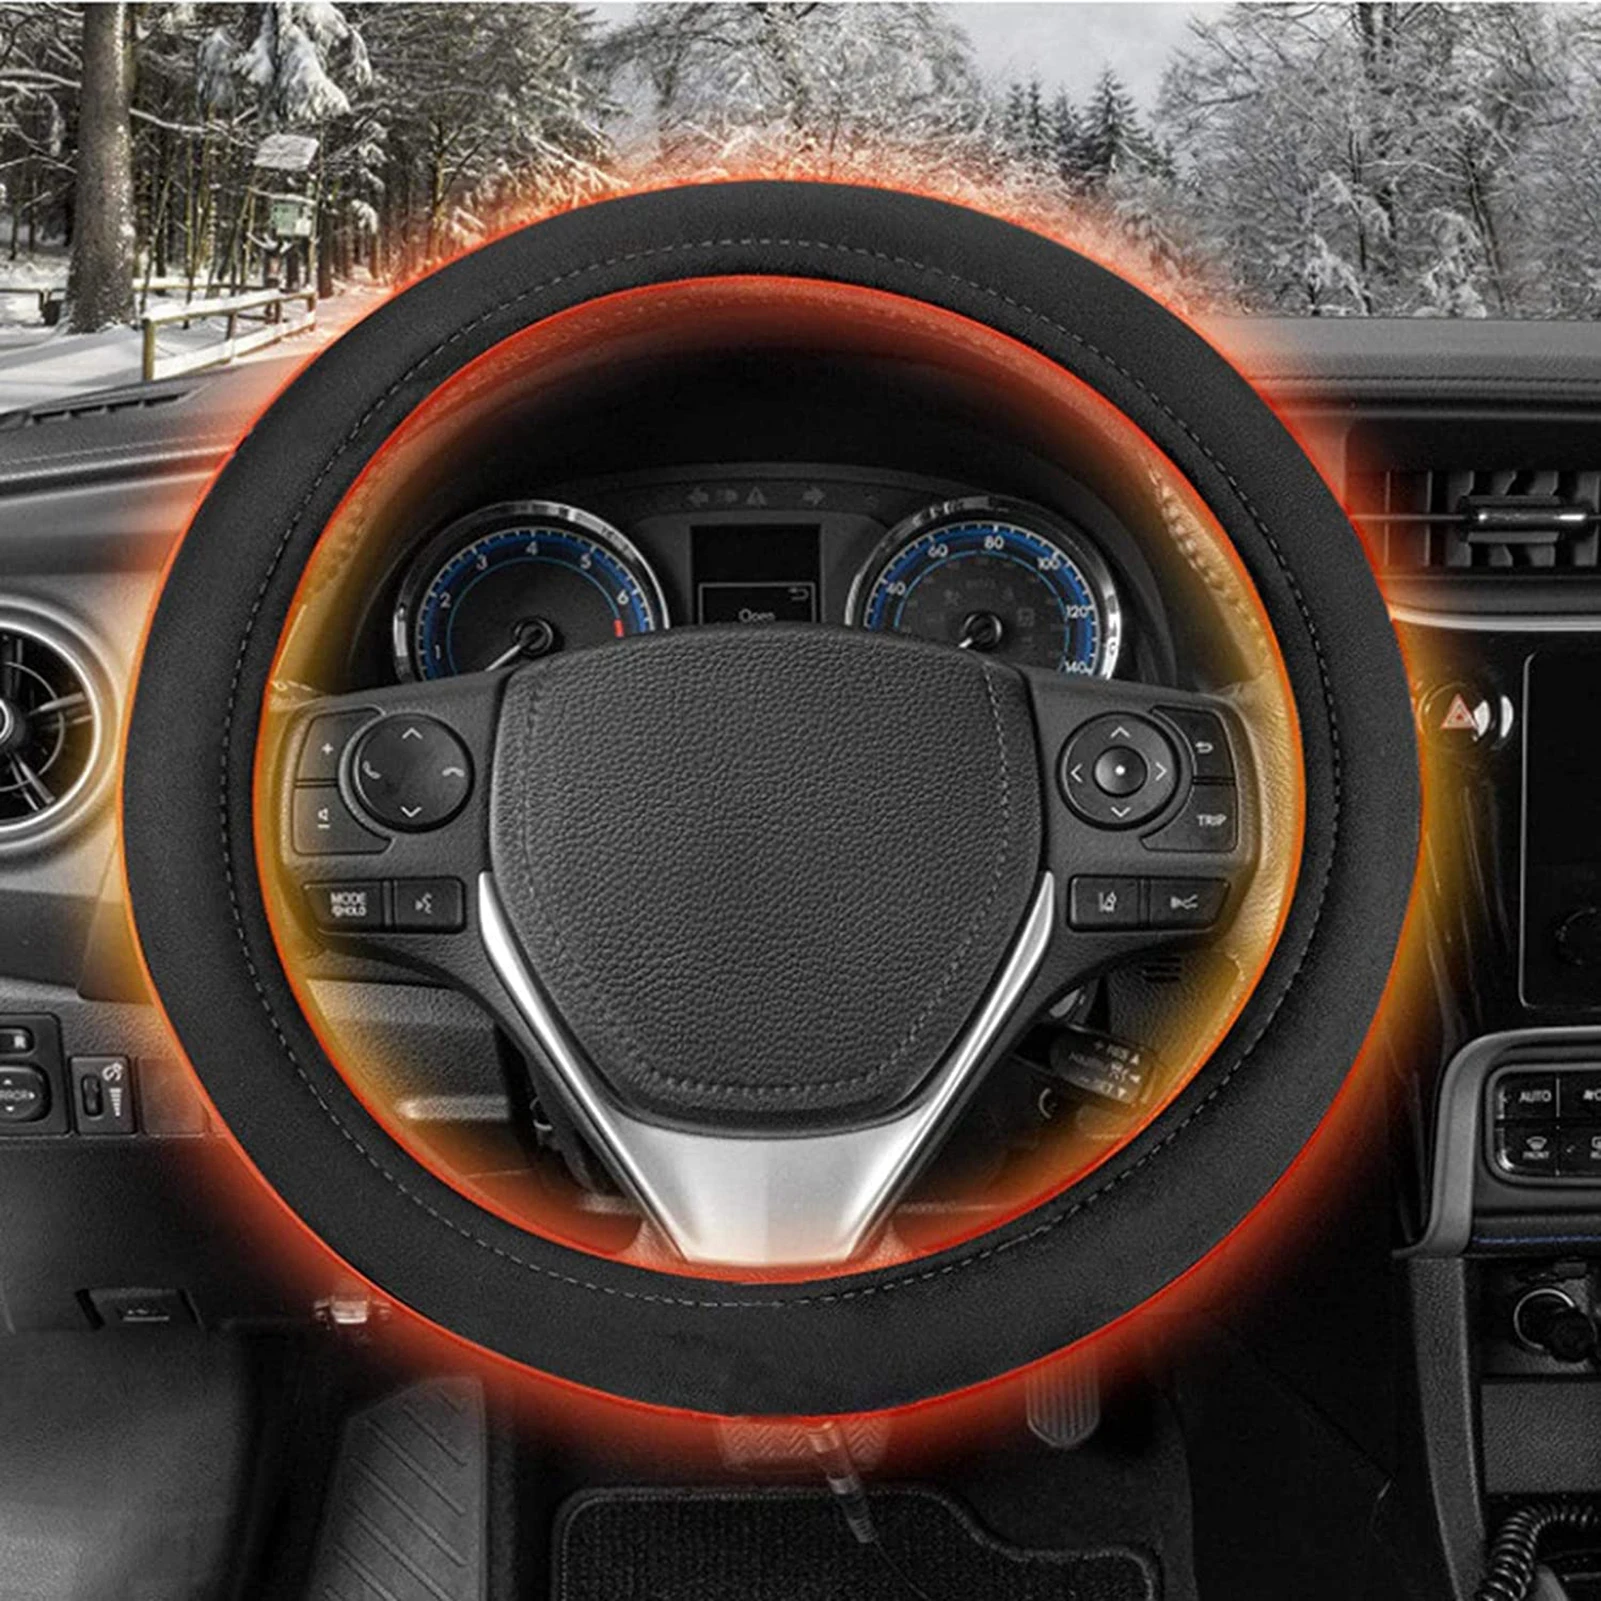 Heated Steering Wheel Cover Premium Quality Cover with Heater 12V